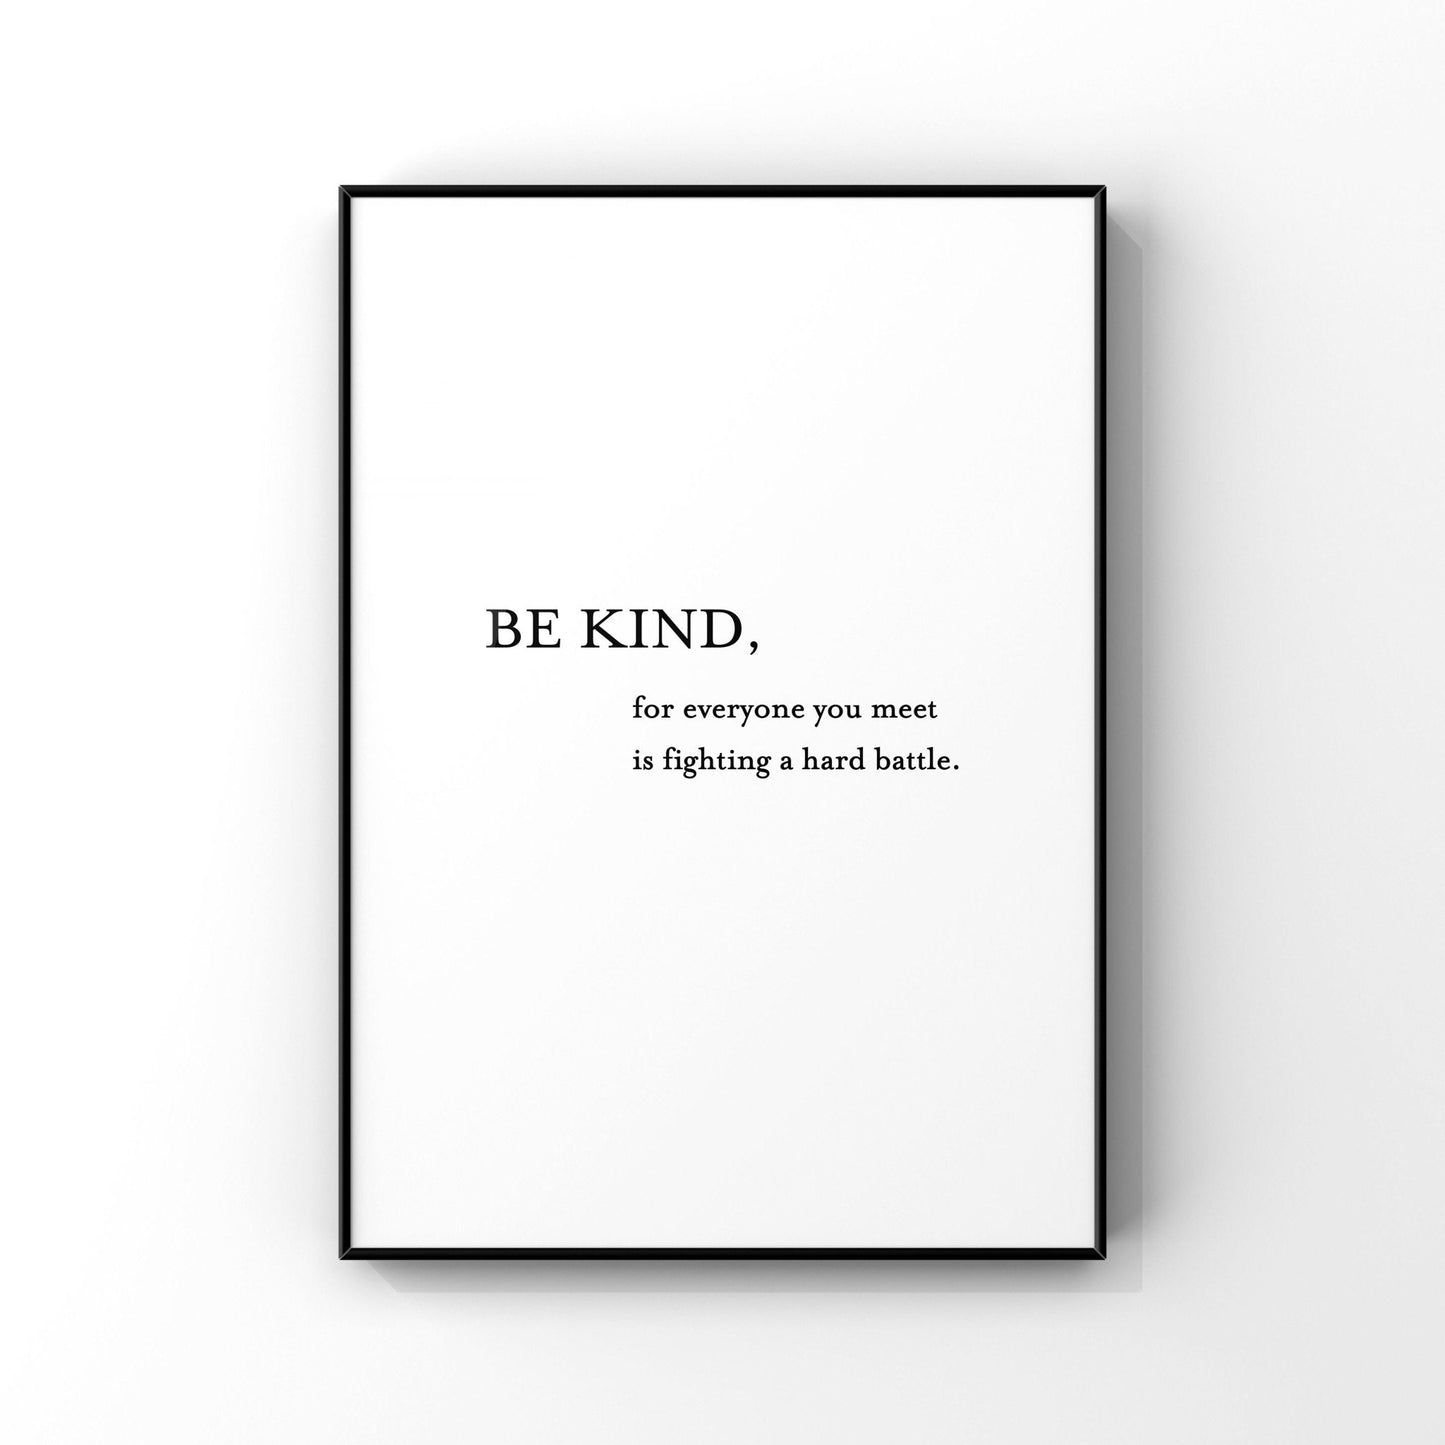 Be kind,Everyone is fighting a hard battle,Inspirational quote print,Kindness quote,Classroom decor,Mental health,Office decor,Motivational